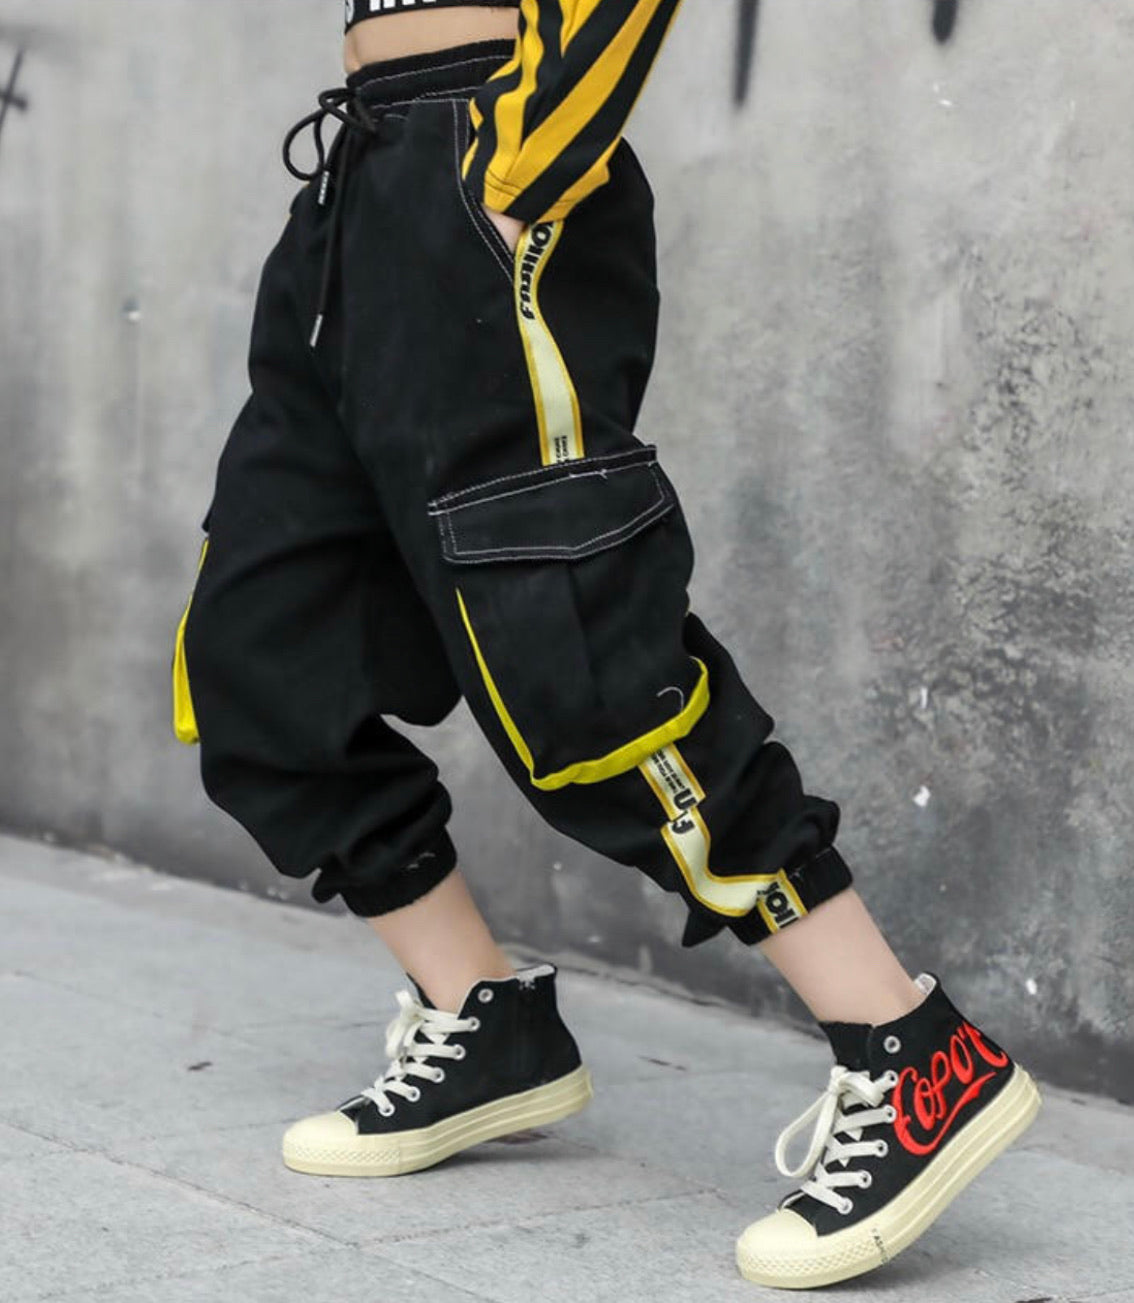 Top and pant set - Hip Hop Style